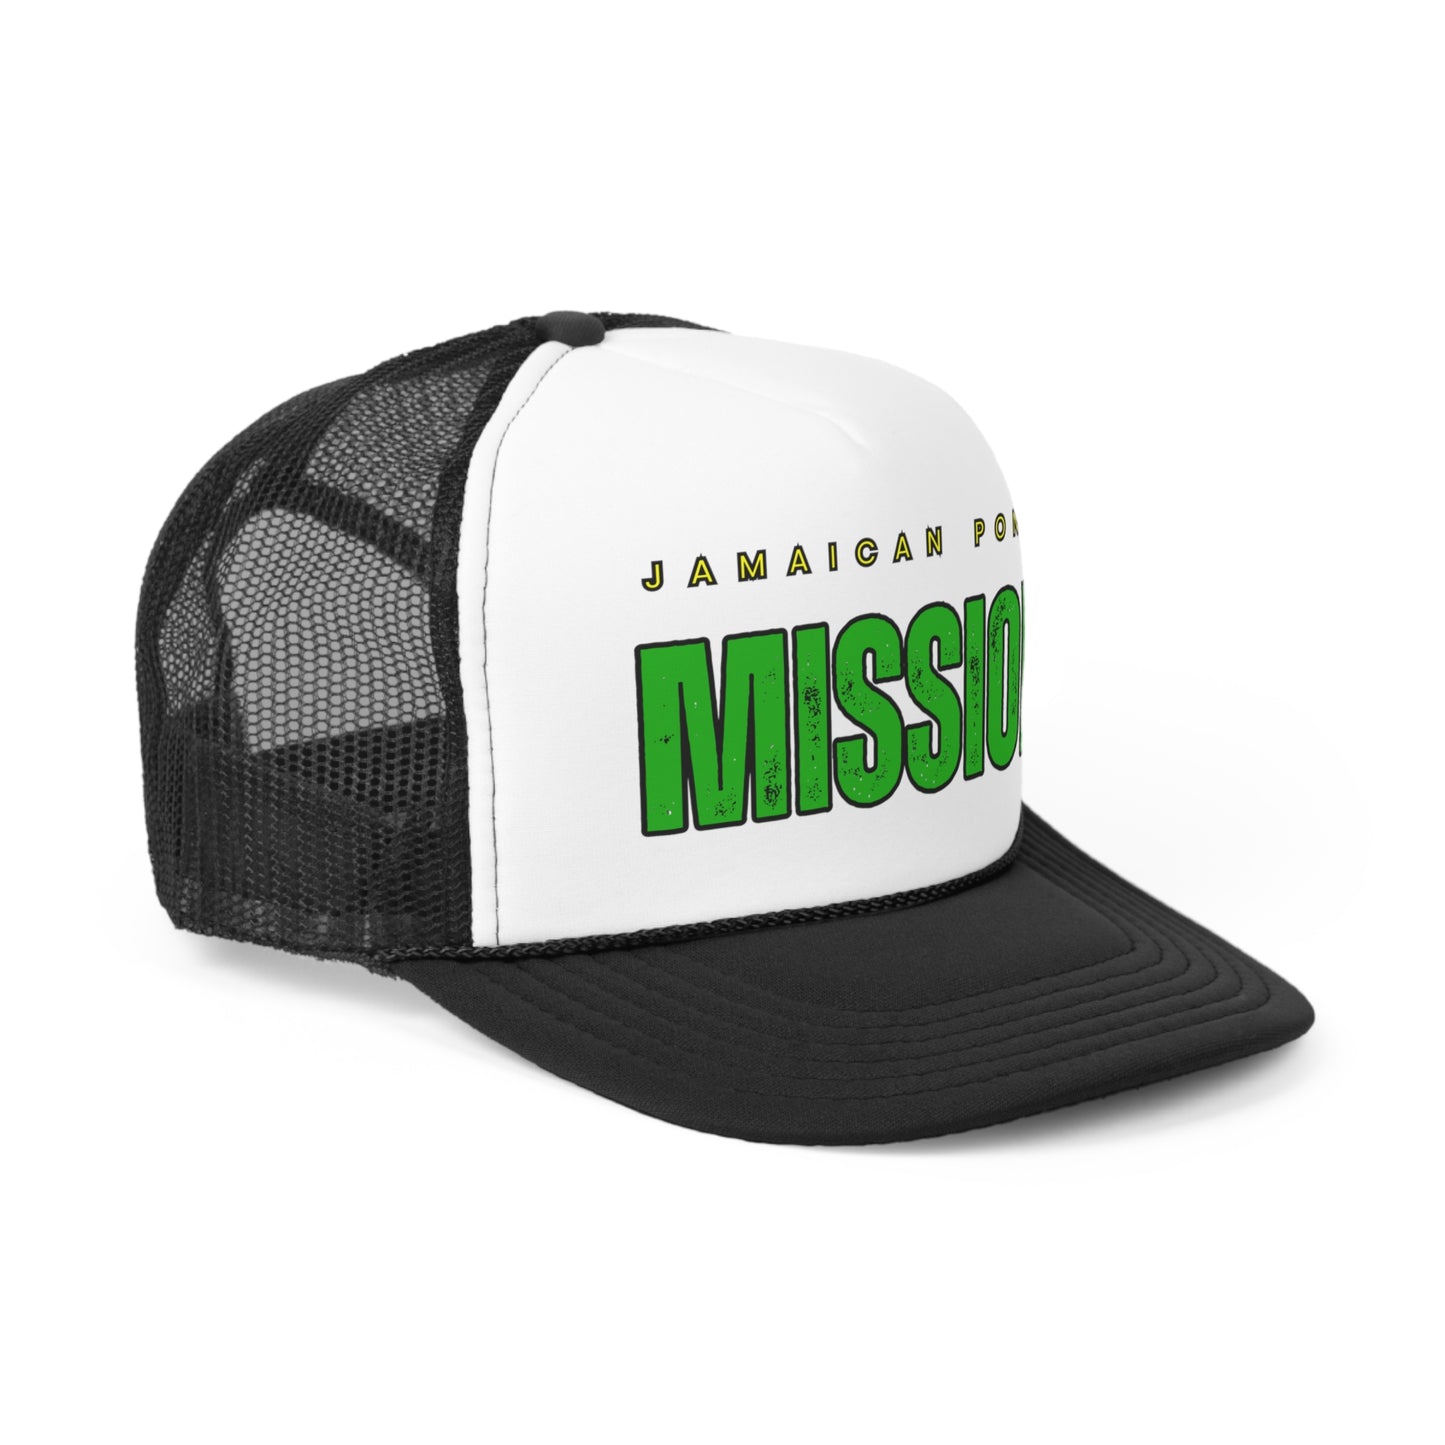 Jamaican on a Mission Trucker Caps